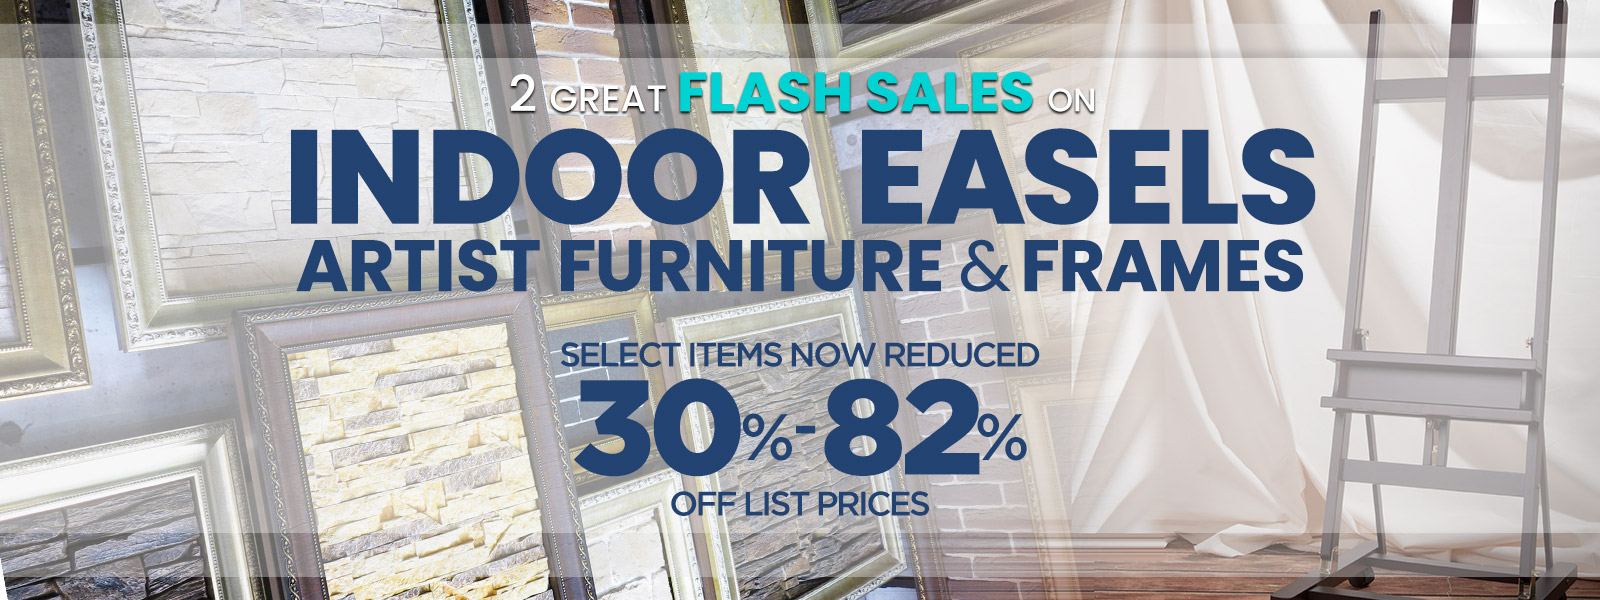 Limited time Flash Sale on Indoor Easels & Studio Furniture - Plus Free Shipping